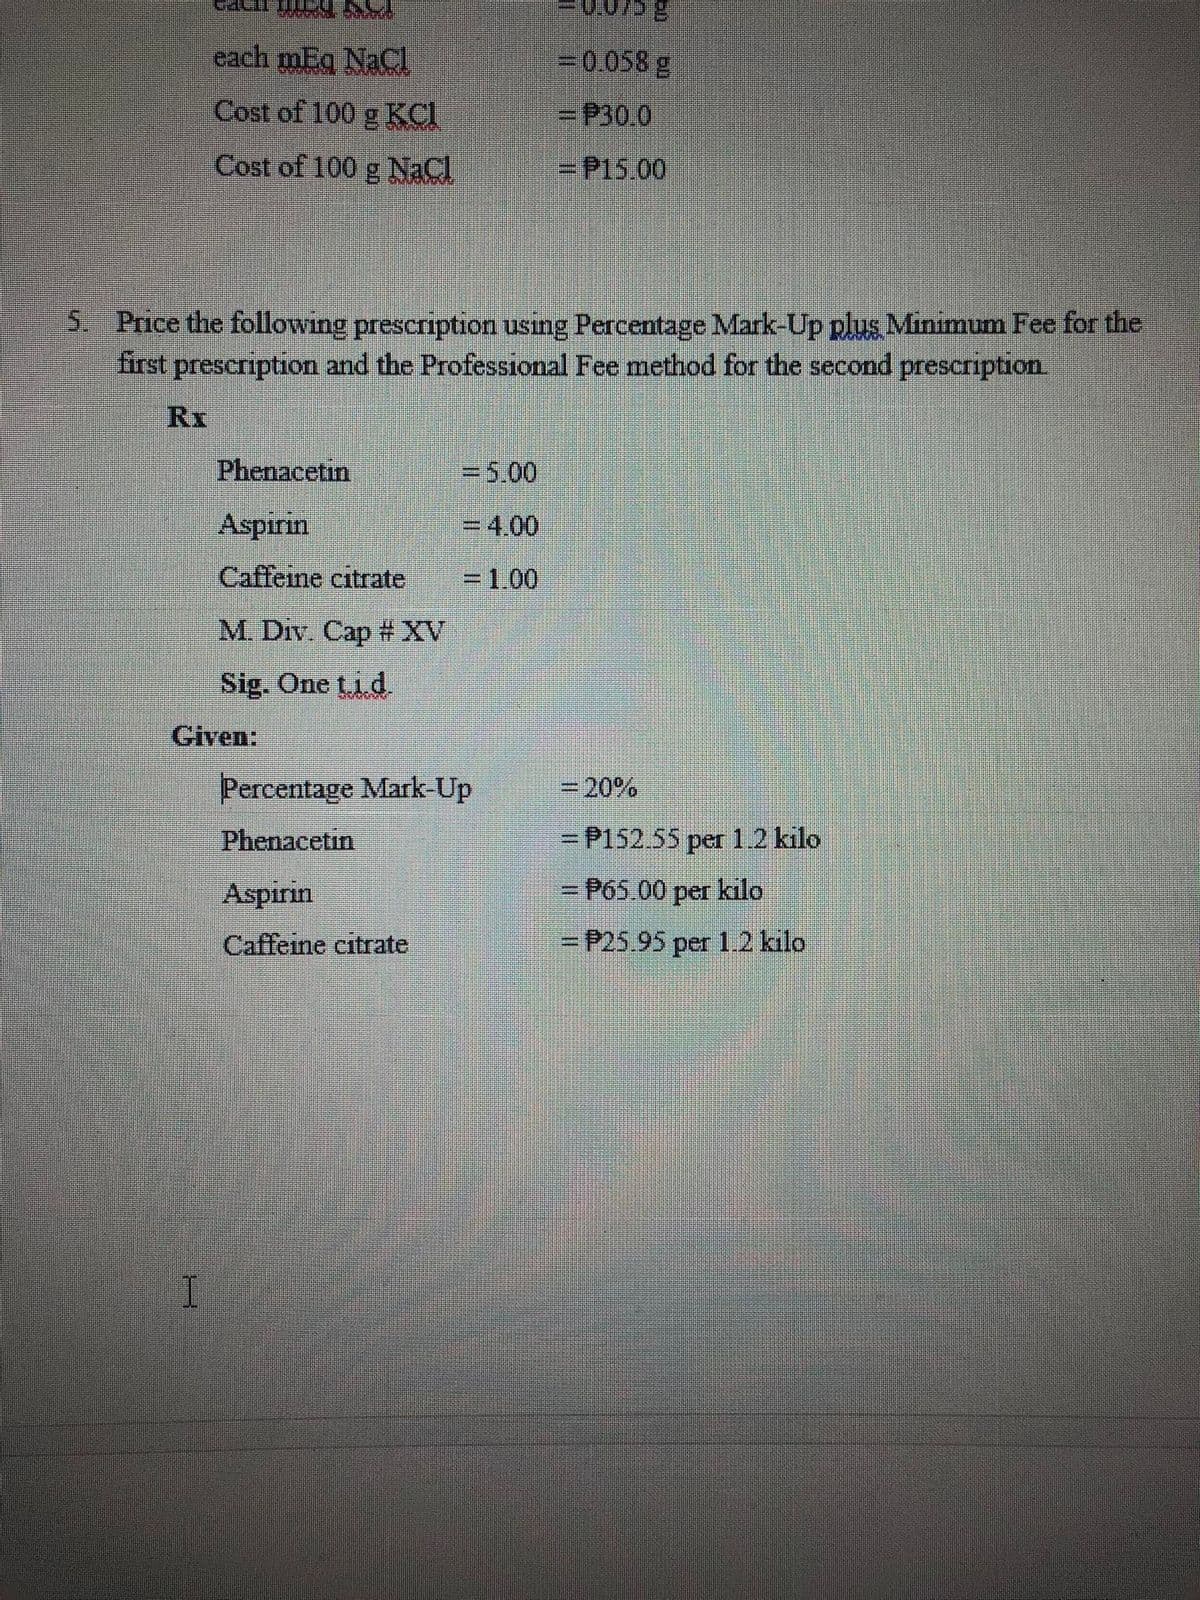 each mEq NaCI
=0.058 g
Cost of 100 g KCI
=P30.0
Cost of 100 g NaCl
=P15.00
5 Price the following prescription using Percentage Mark-Up plus Minimum Fee for the
first prescription and the Professional Fee method for the second prescription
RI
Phenacetin
%3D5.00
Aspirin
= 4.00
Caffeine citrate
=1.00
M. Div. Cap # XV
Sig. One ti d
Given:
Percentage Mark-Up
=20%
Phenacetin
= P152.55 per 1.2 kilo
Aspirin
= P65.00 per kilo
Caffeine citrate
=DP25.95per 1.2 kilo
